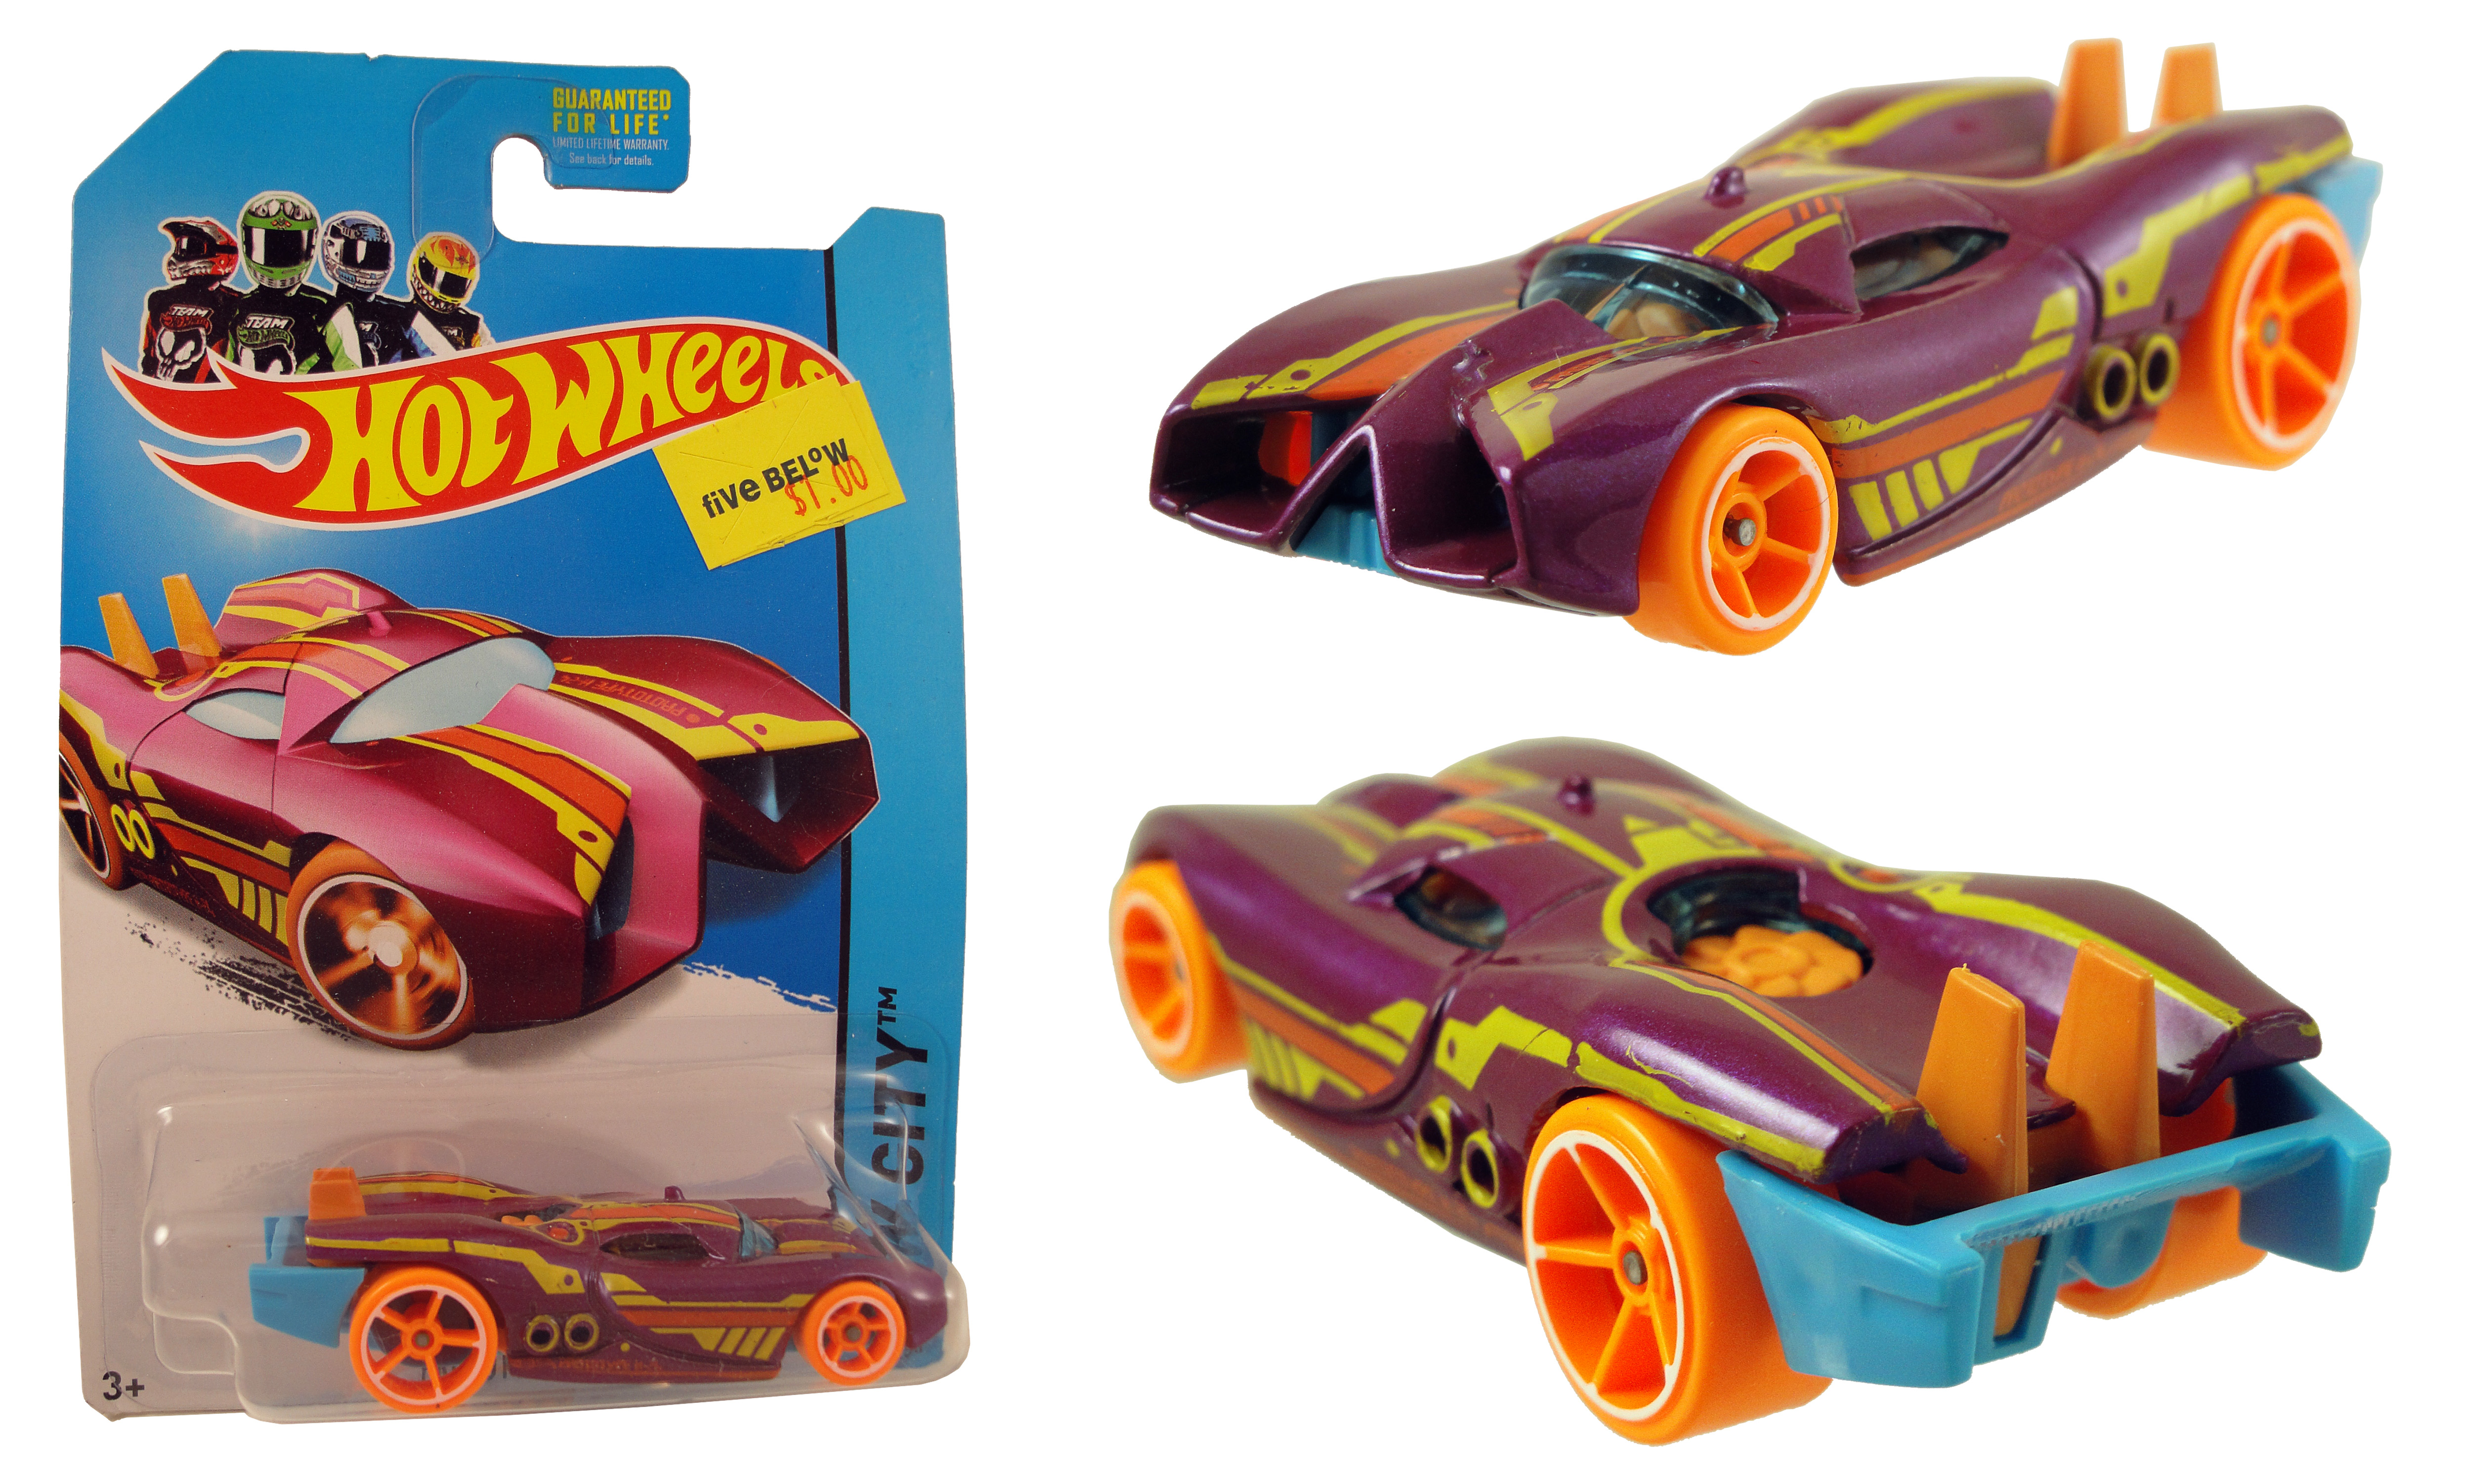 Released to the world in 2008, the Hot Wheels Prototype H-24. 